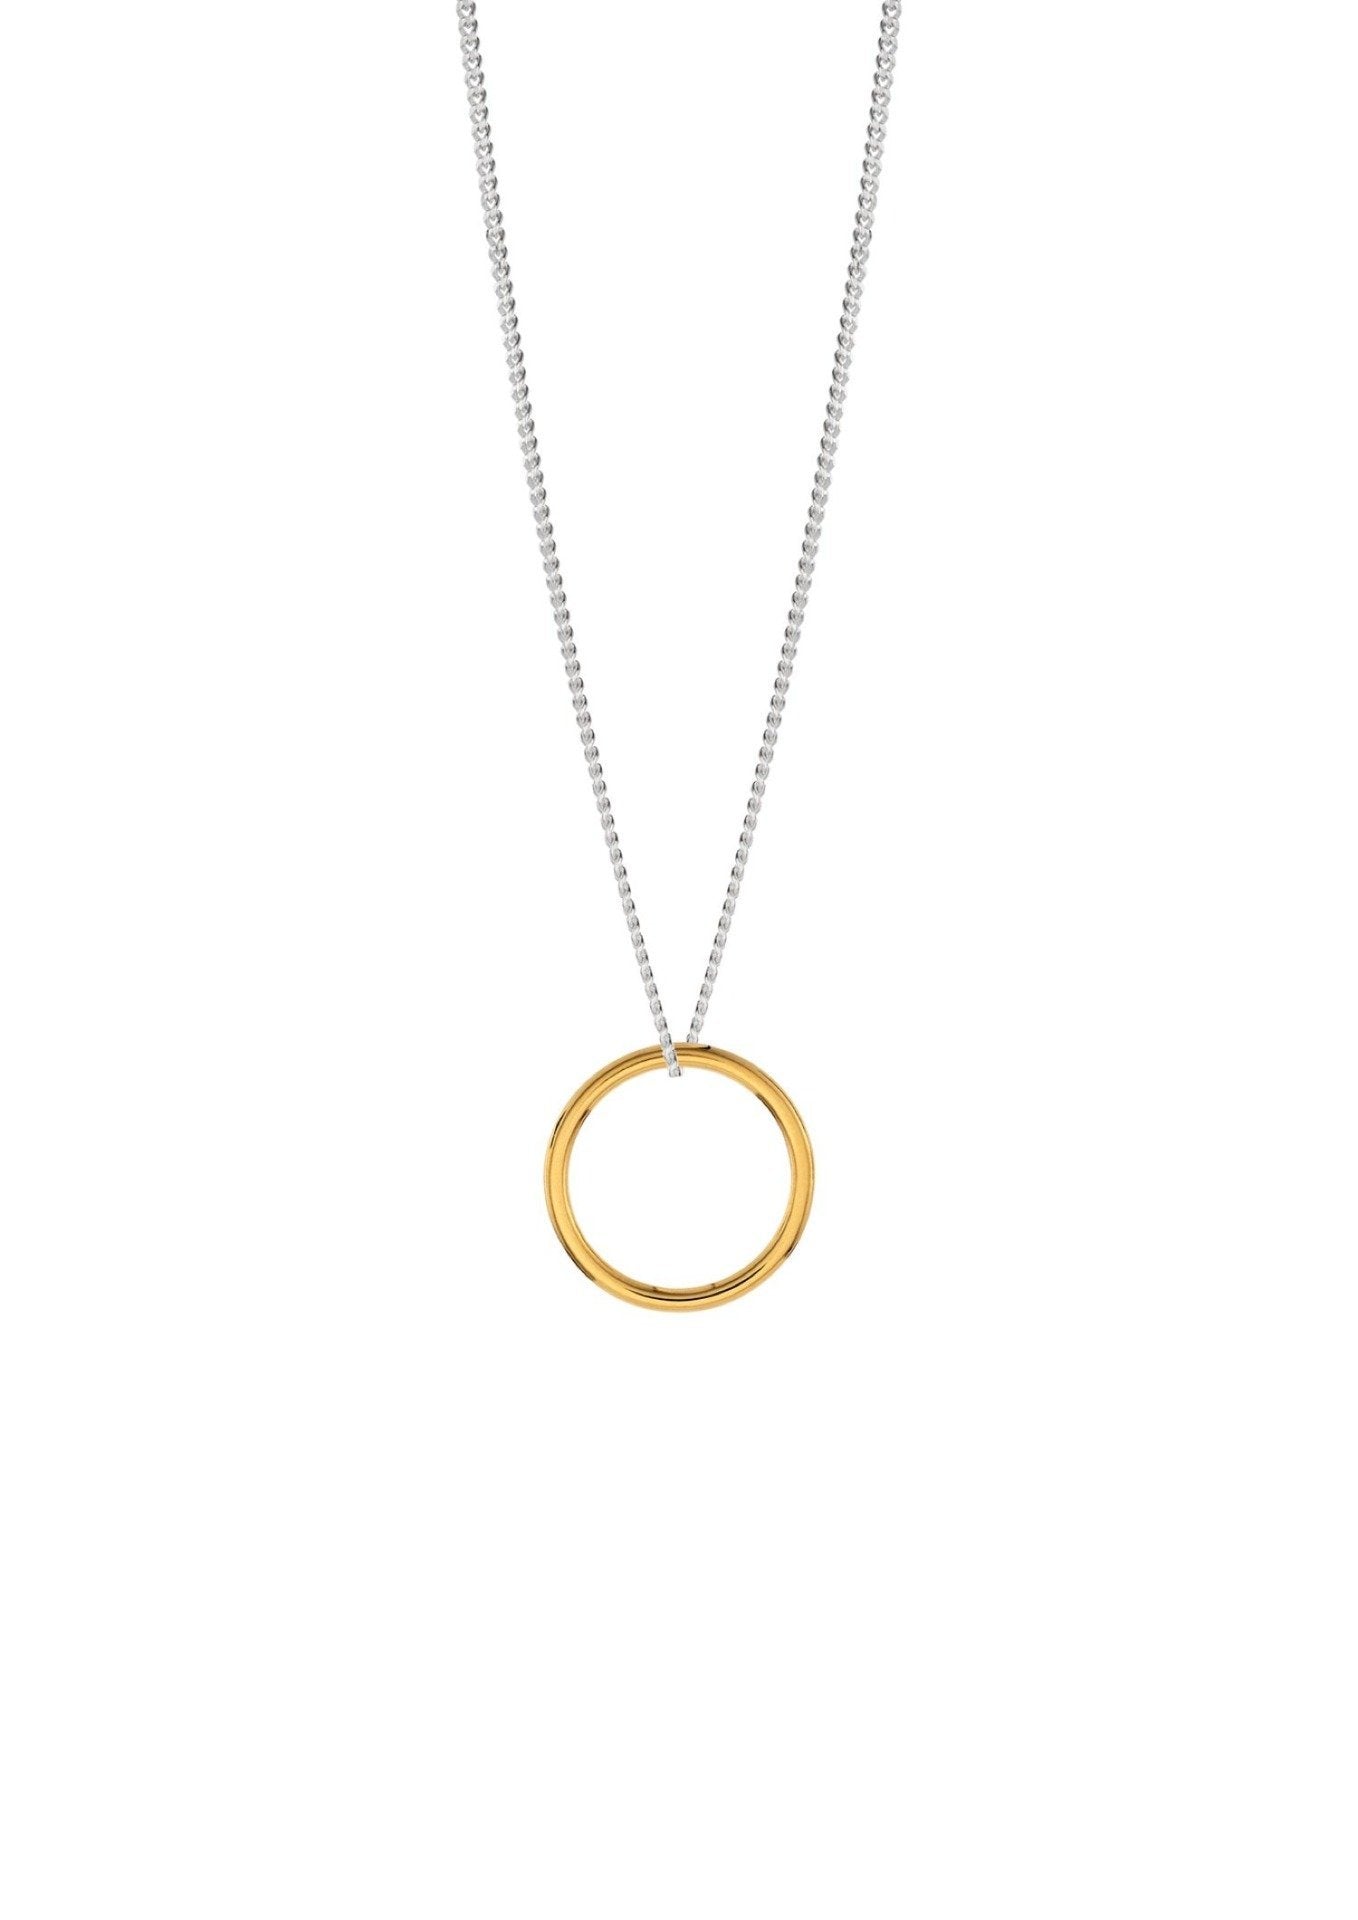 NO MORE accessories Circle Necklace in sterling silver with gold plated pendant